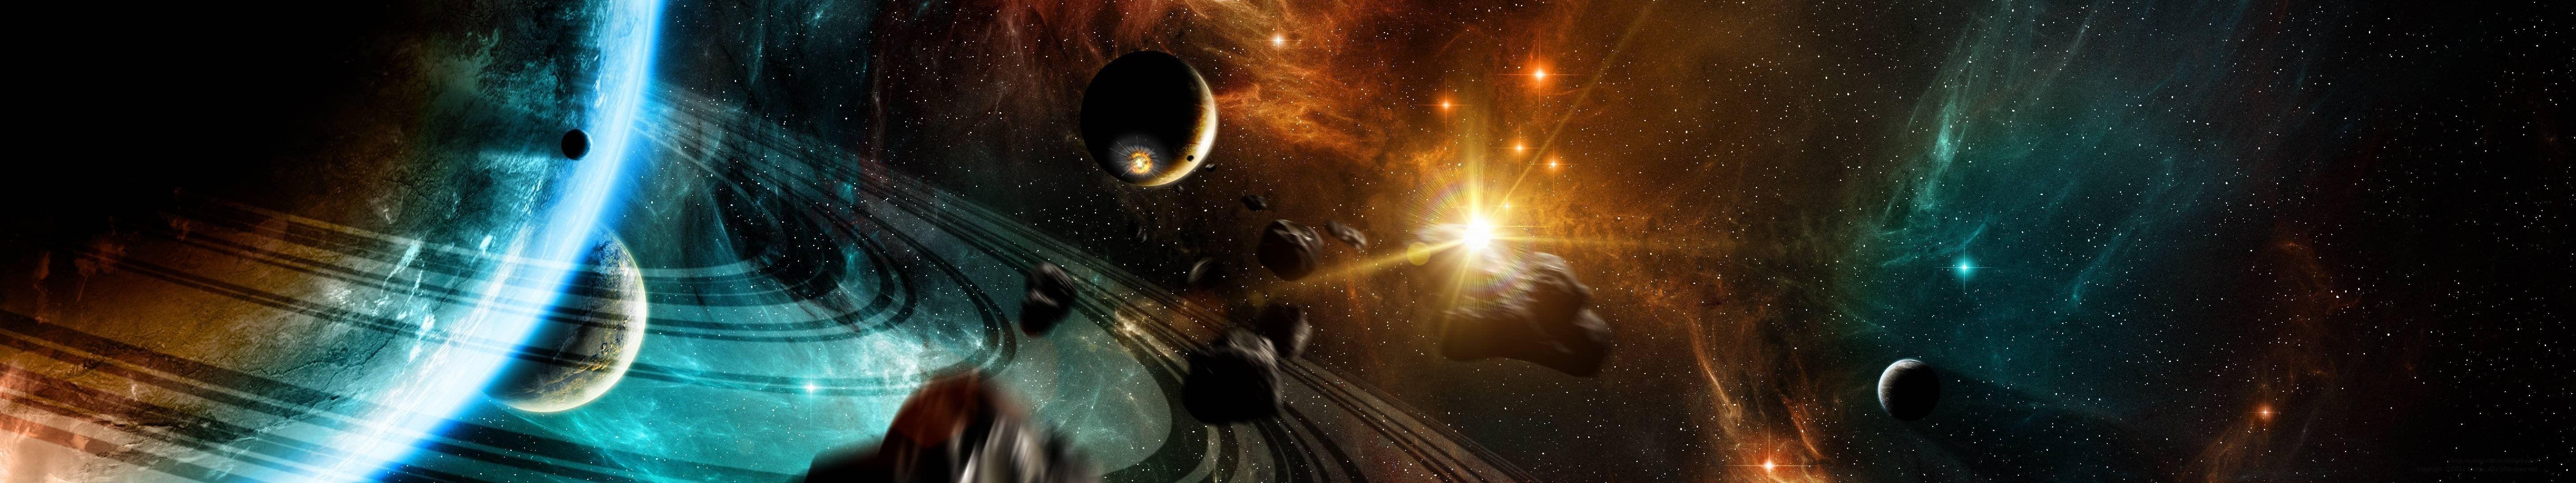 5760 X 2160 Space Wallpapers  Top Free 5760 X 2160 Space 